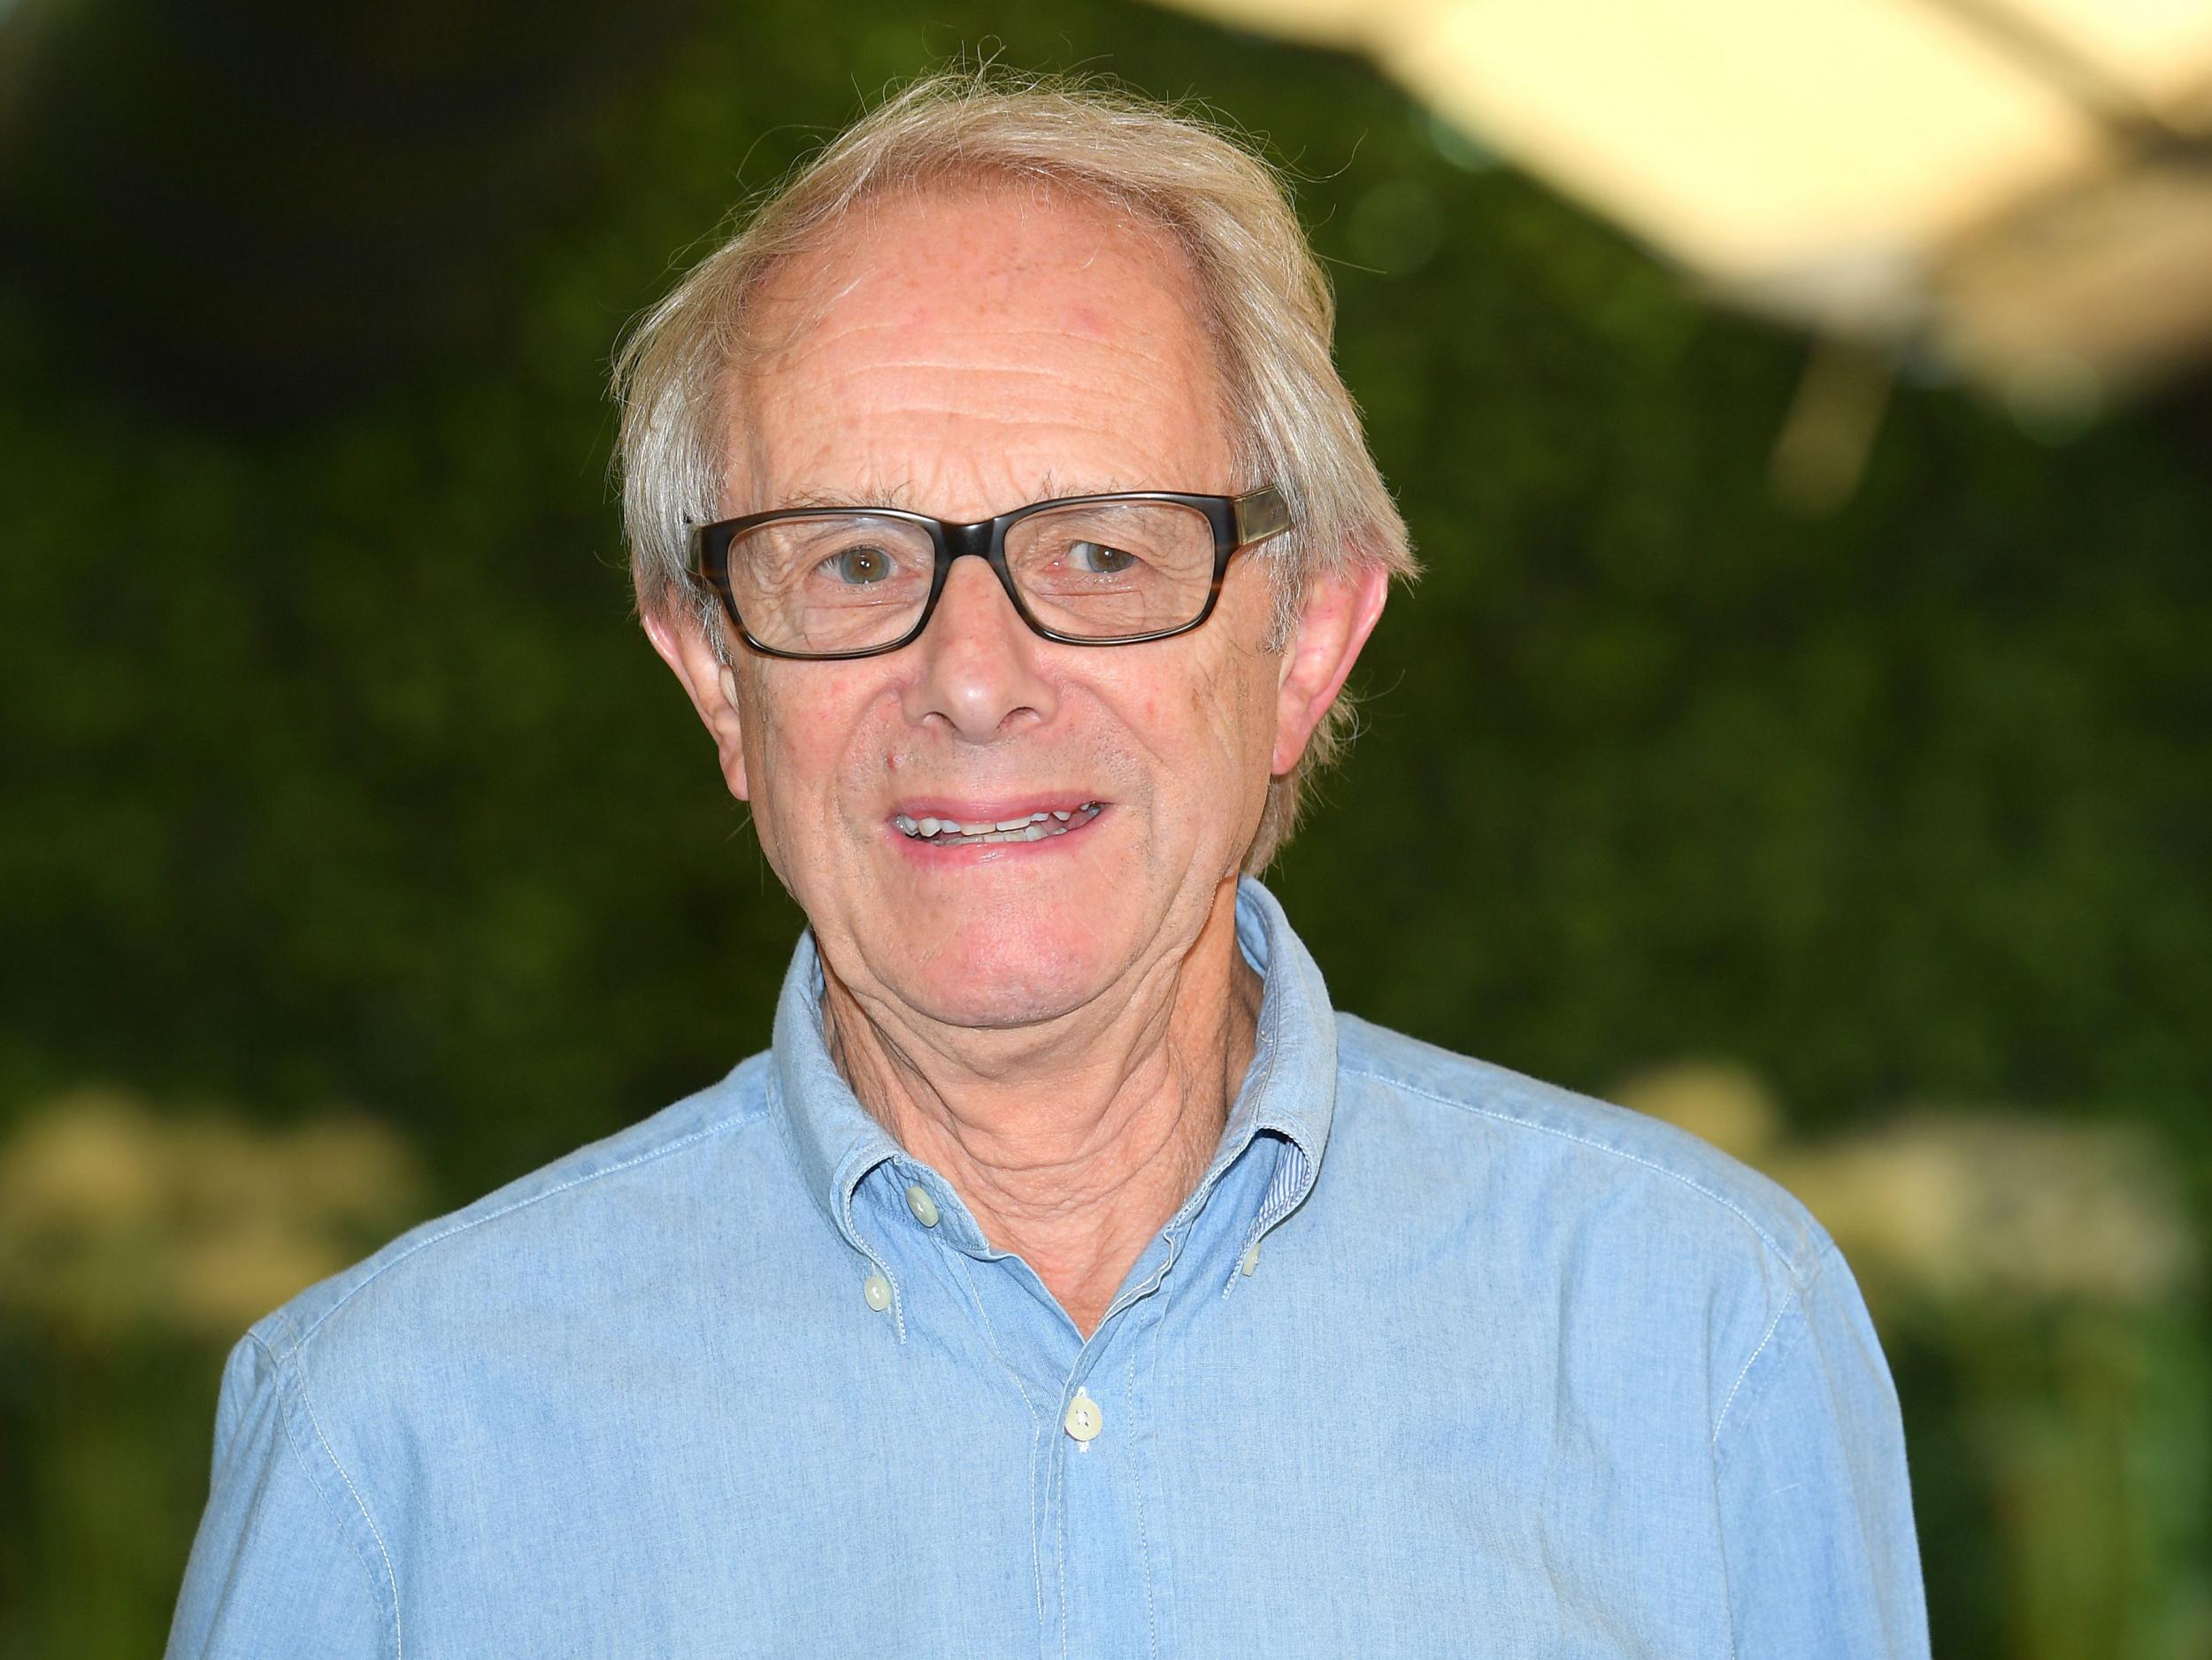 Ken Loach directed Kes, The Wind That Shakes the Barley and I, Daniel Blake